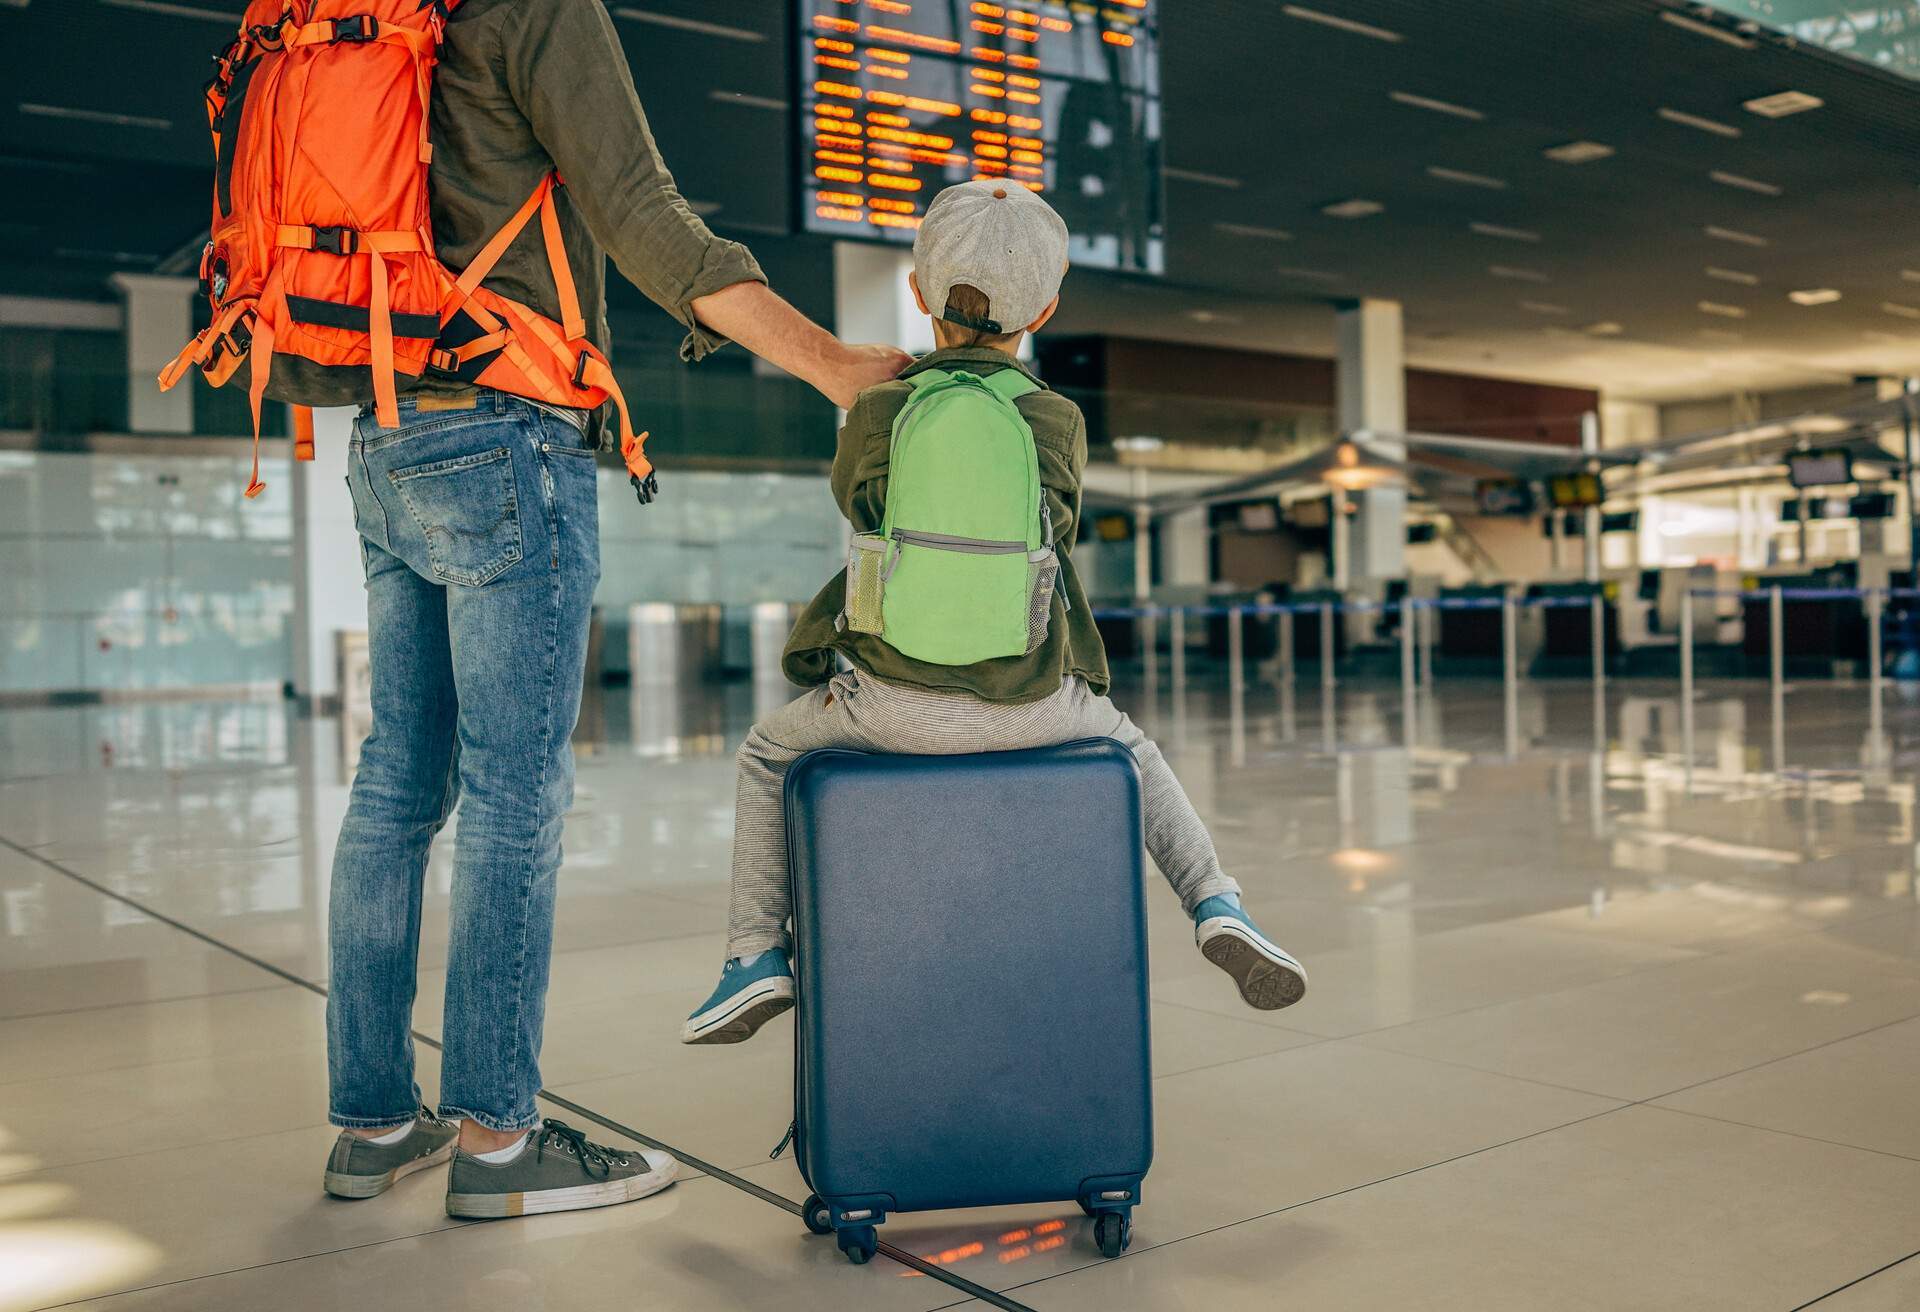 theme_travel_airport_father_son_suitcase_luggage